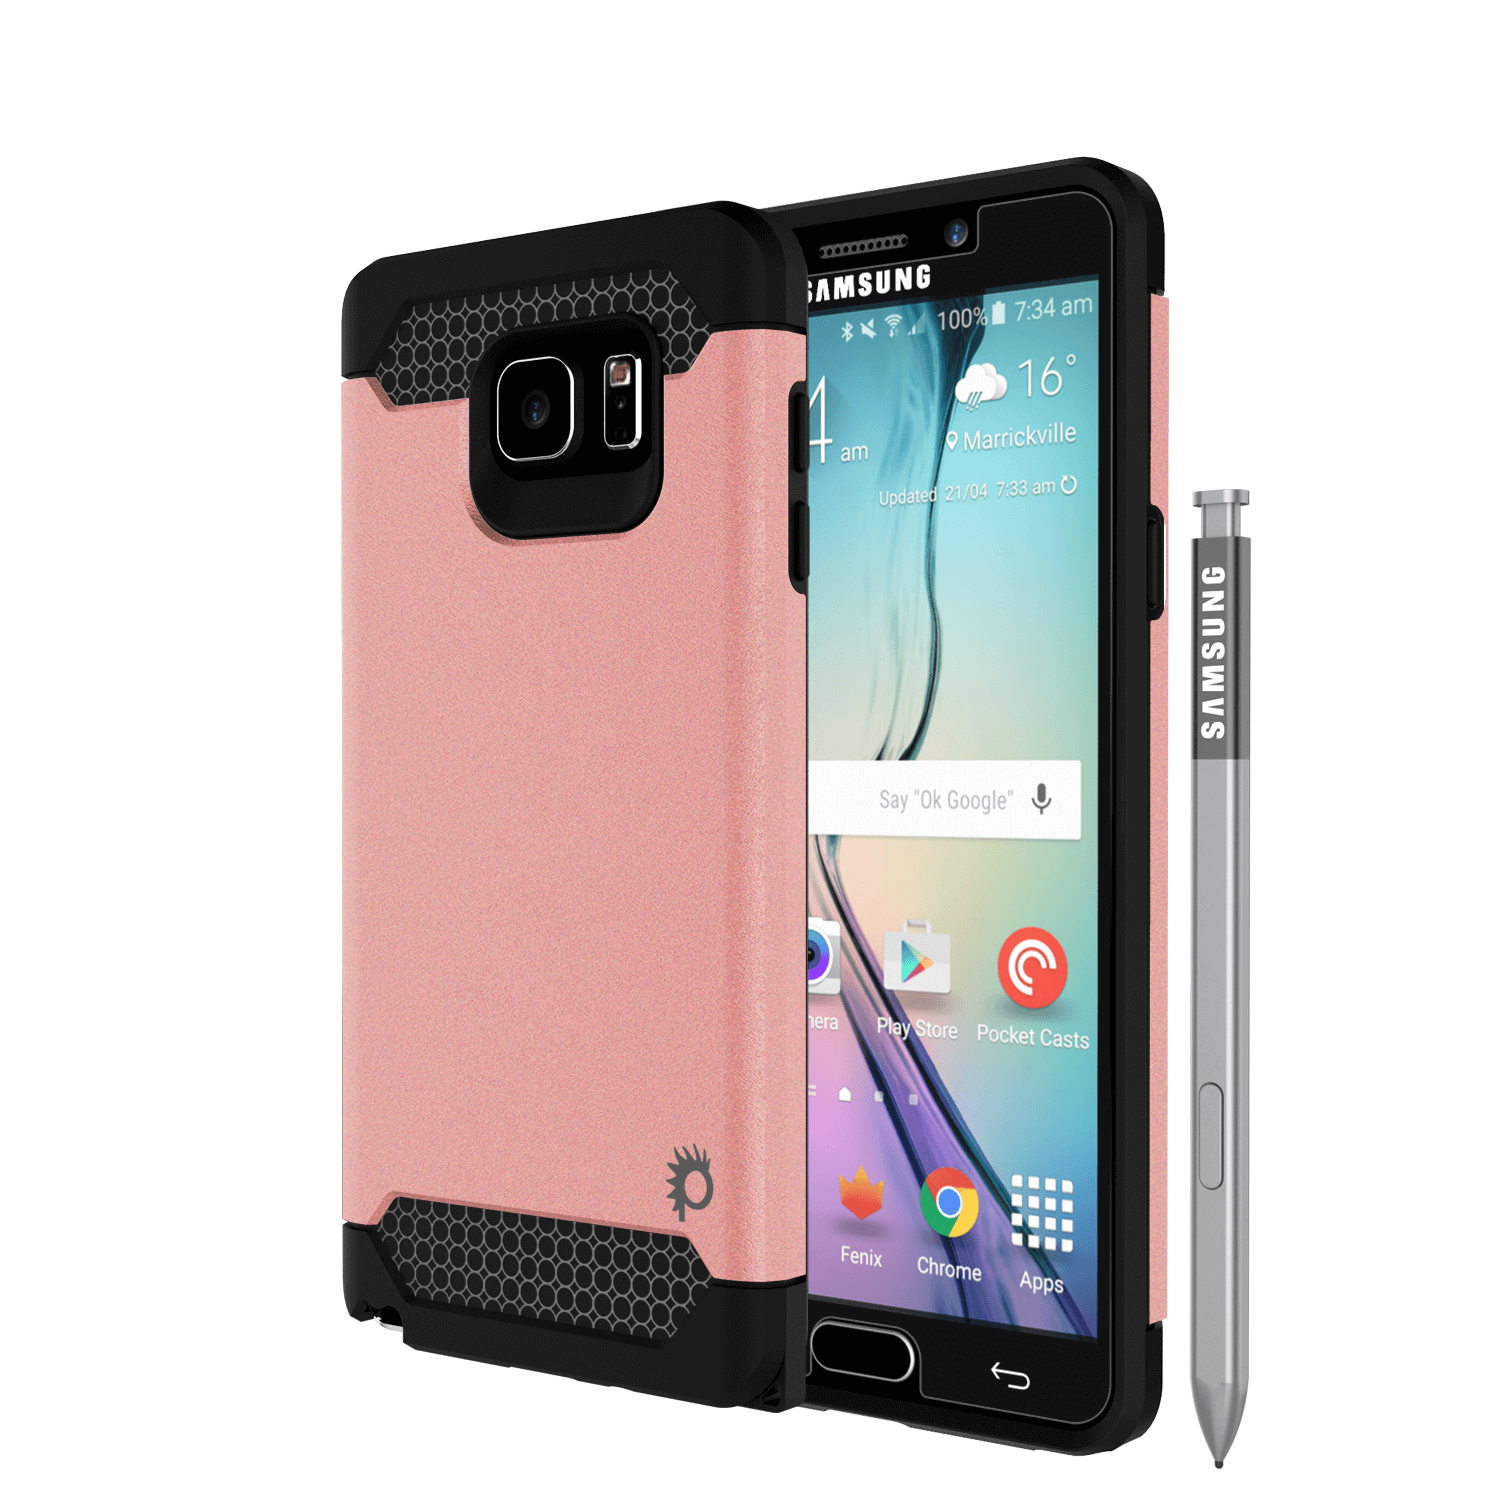 Galaxy Note 5Case PunkCase Galactic Rose Gold Series Slim Protective Armor Soft Cover Case w/ Tempered Glass Protector Lifetime Warranty